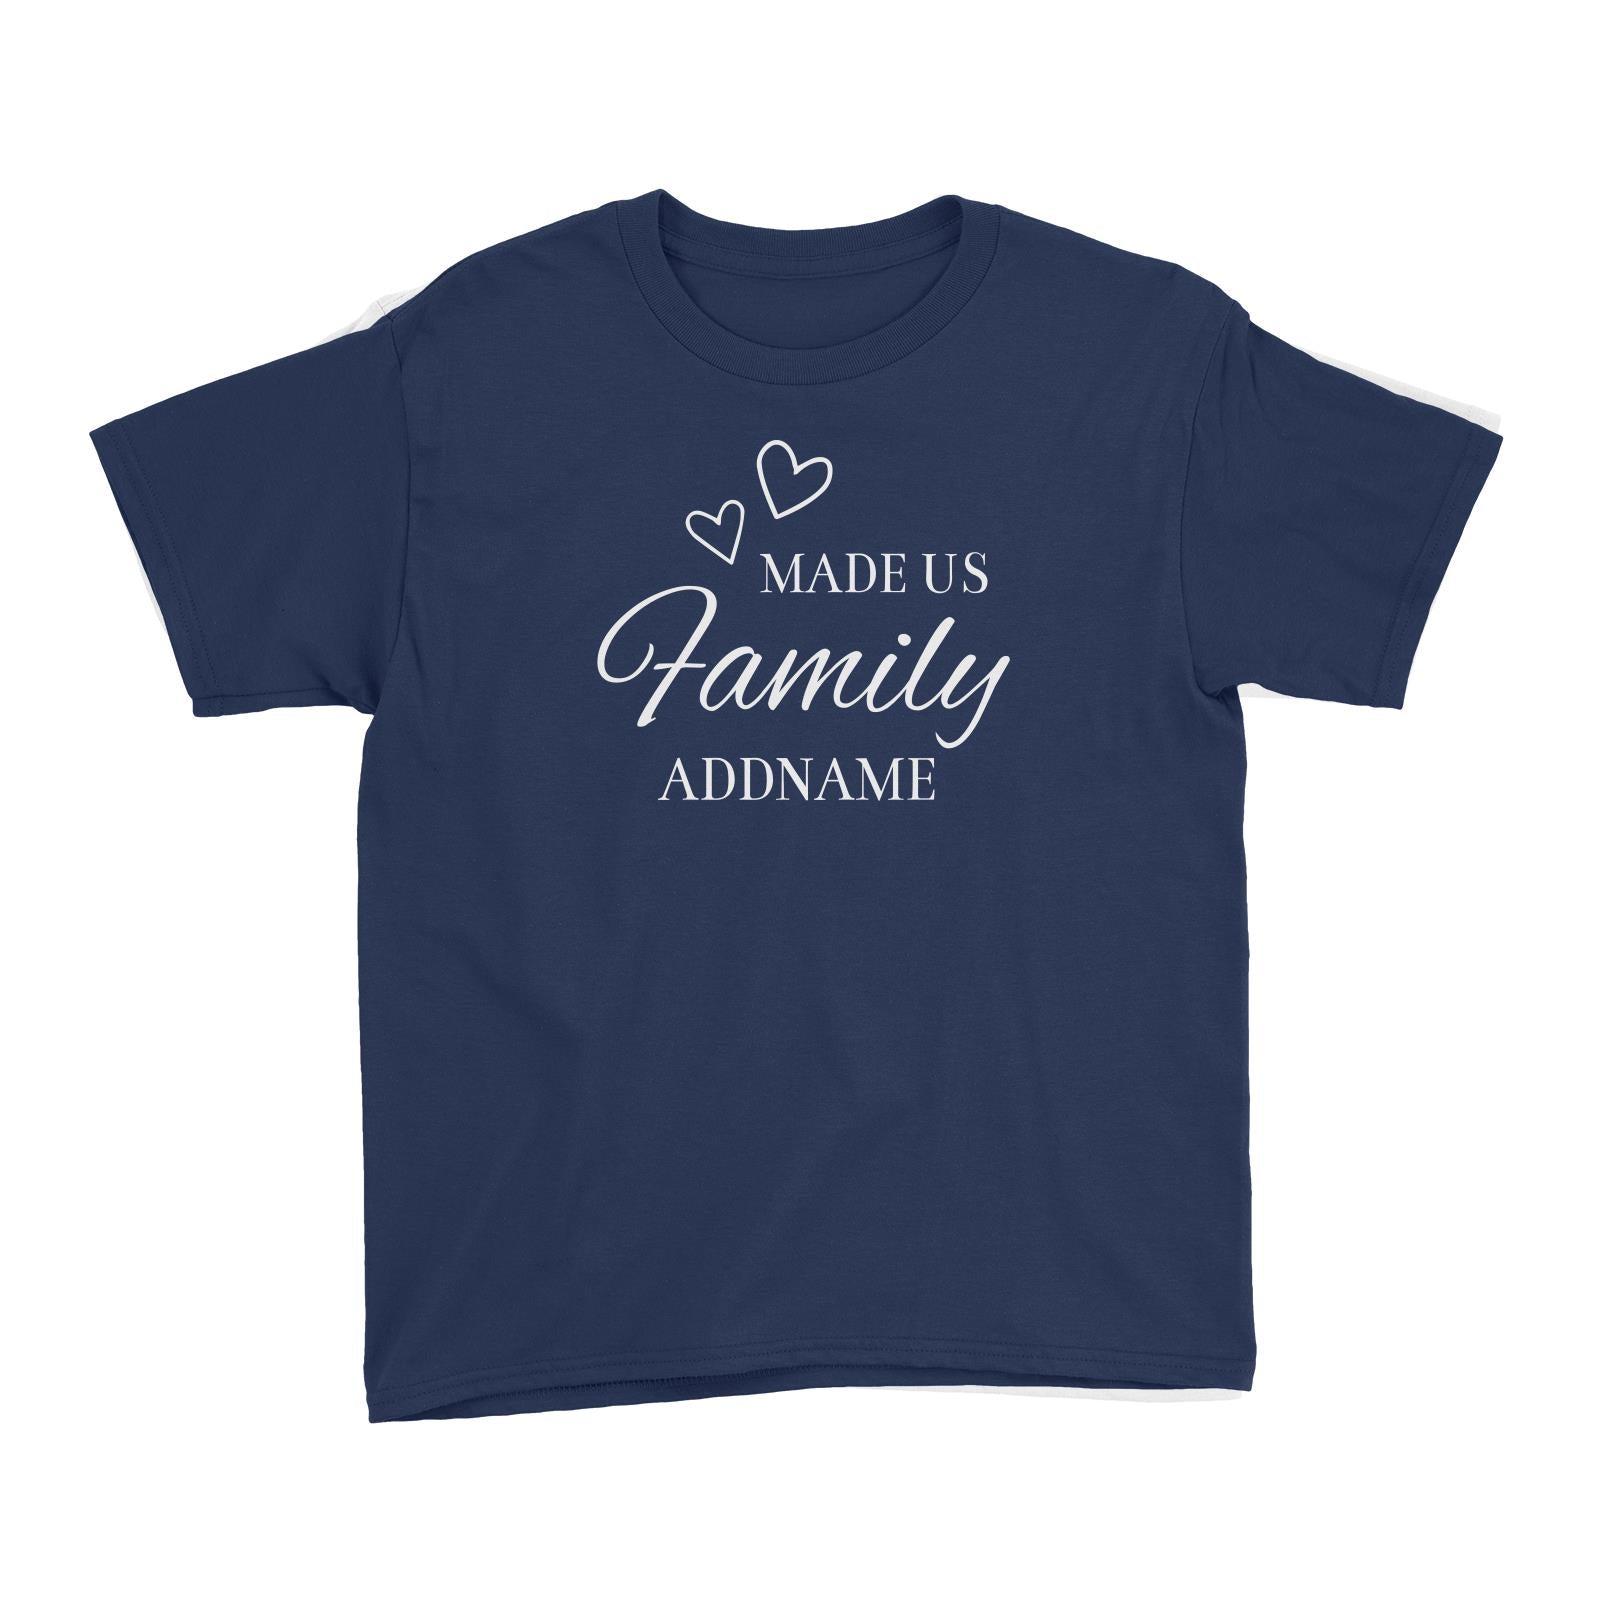 Love Made Us Family Addname Kid's T-Shirt